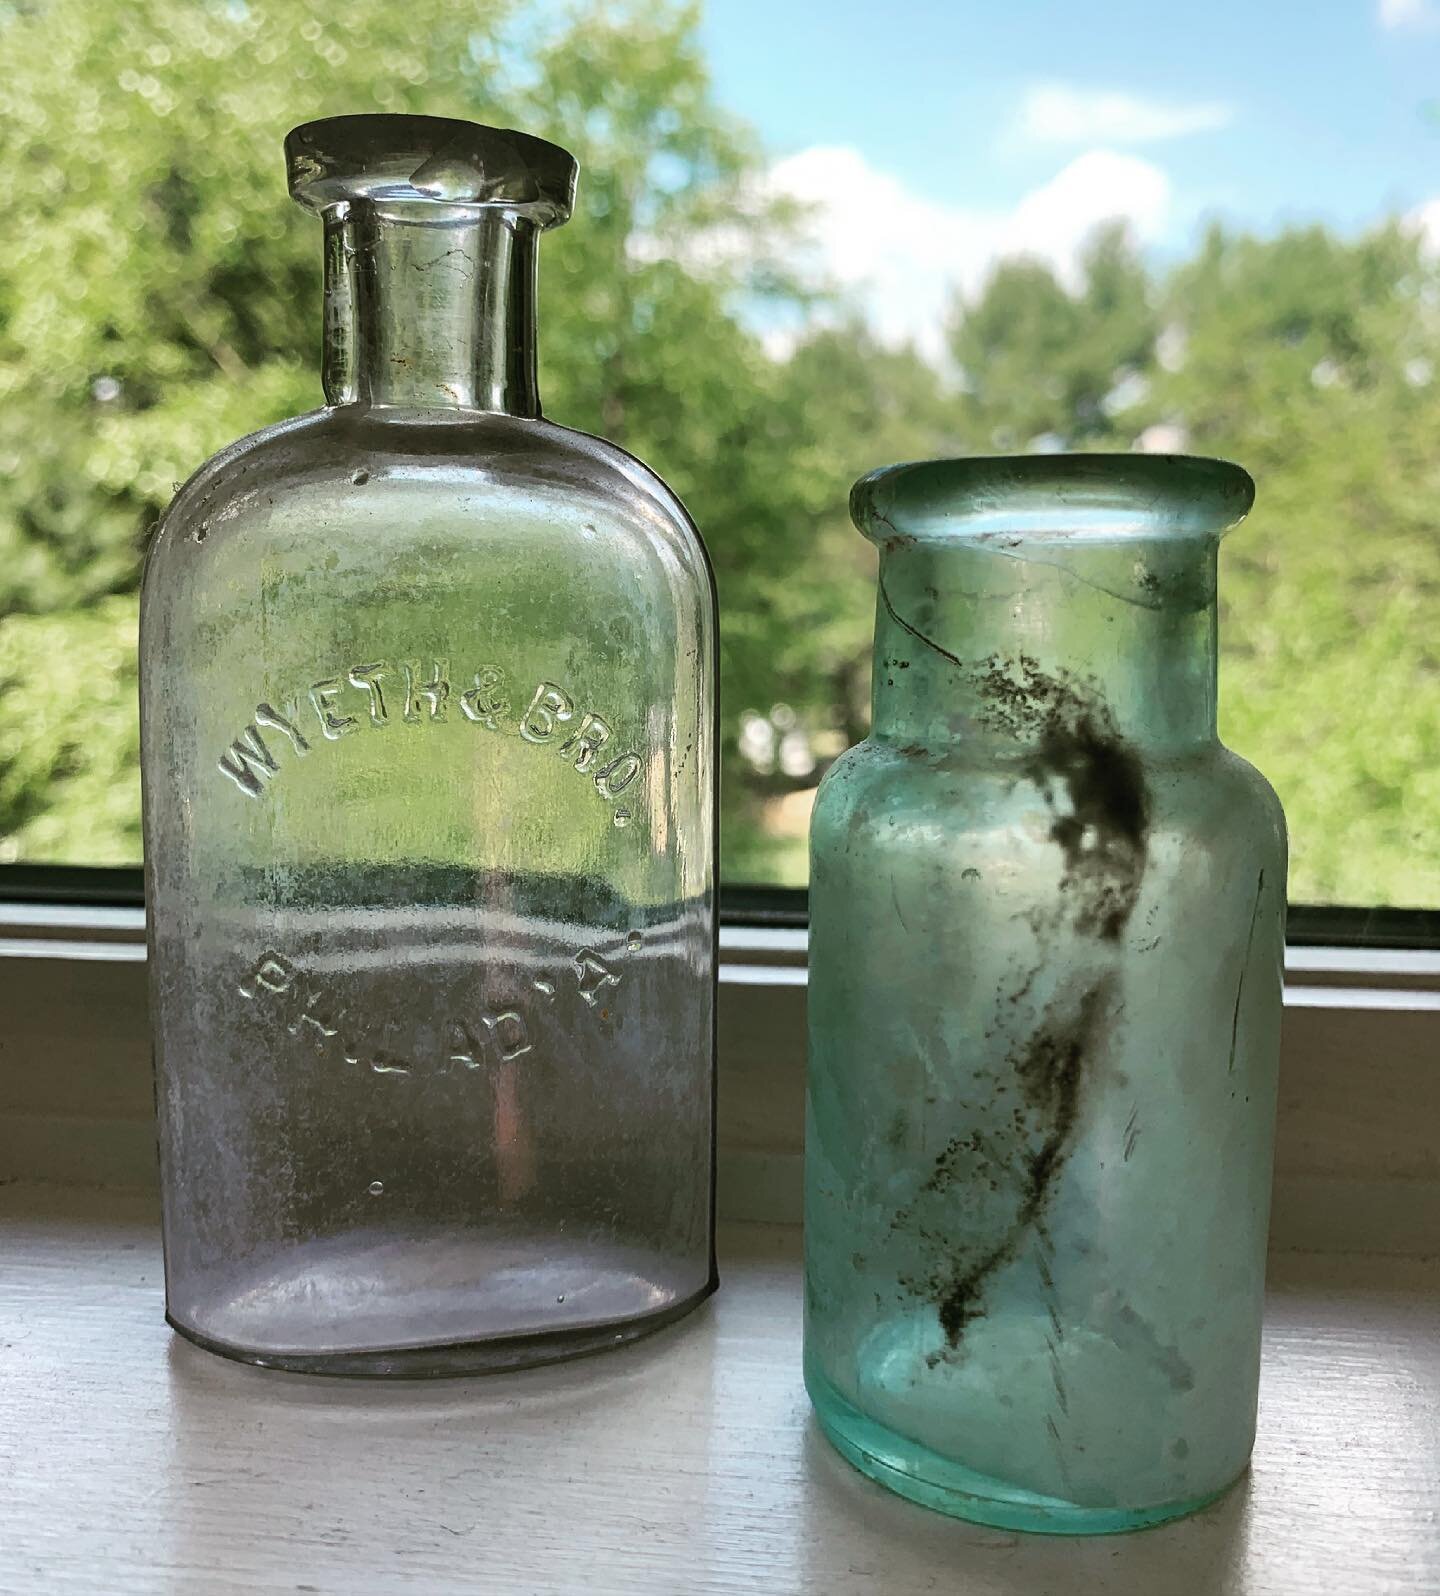 &ldquo;Wyeth &amp; Bro. / Philad&rsquo;a.&rdquo;
What did these bottles once hold? Someone wanted what was in them. Why?

Found in a forgotten antique store in Maine. 

#thestorycabinet #writingprompts #oldstuffiscool #writewithme #antiquefinds #thes